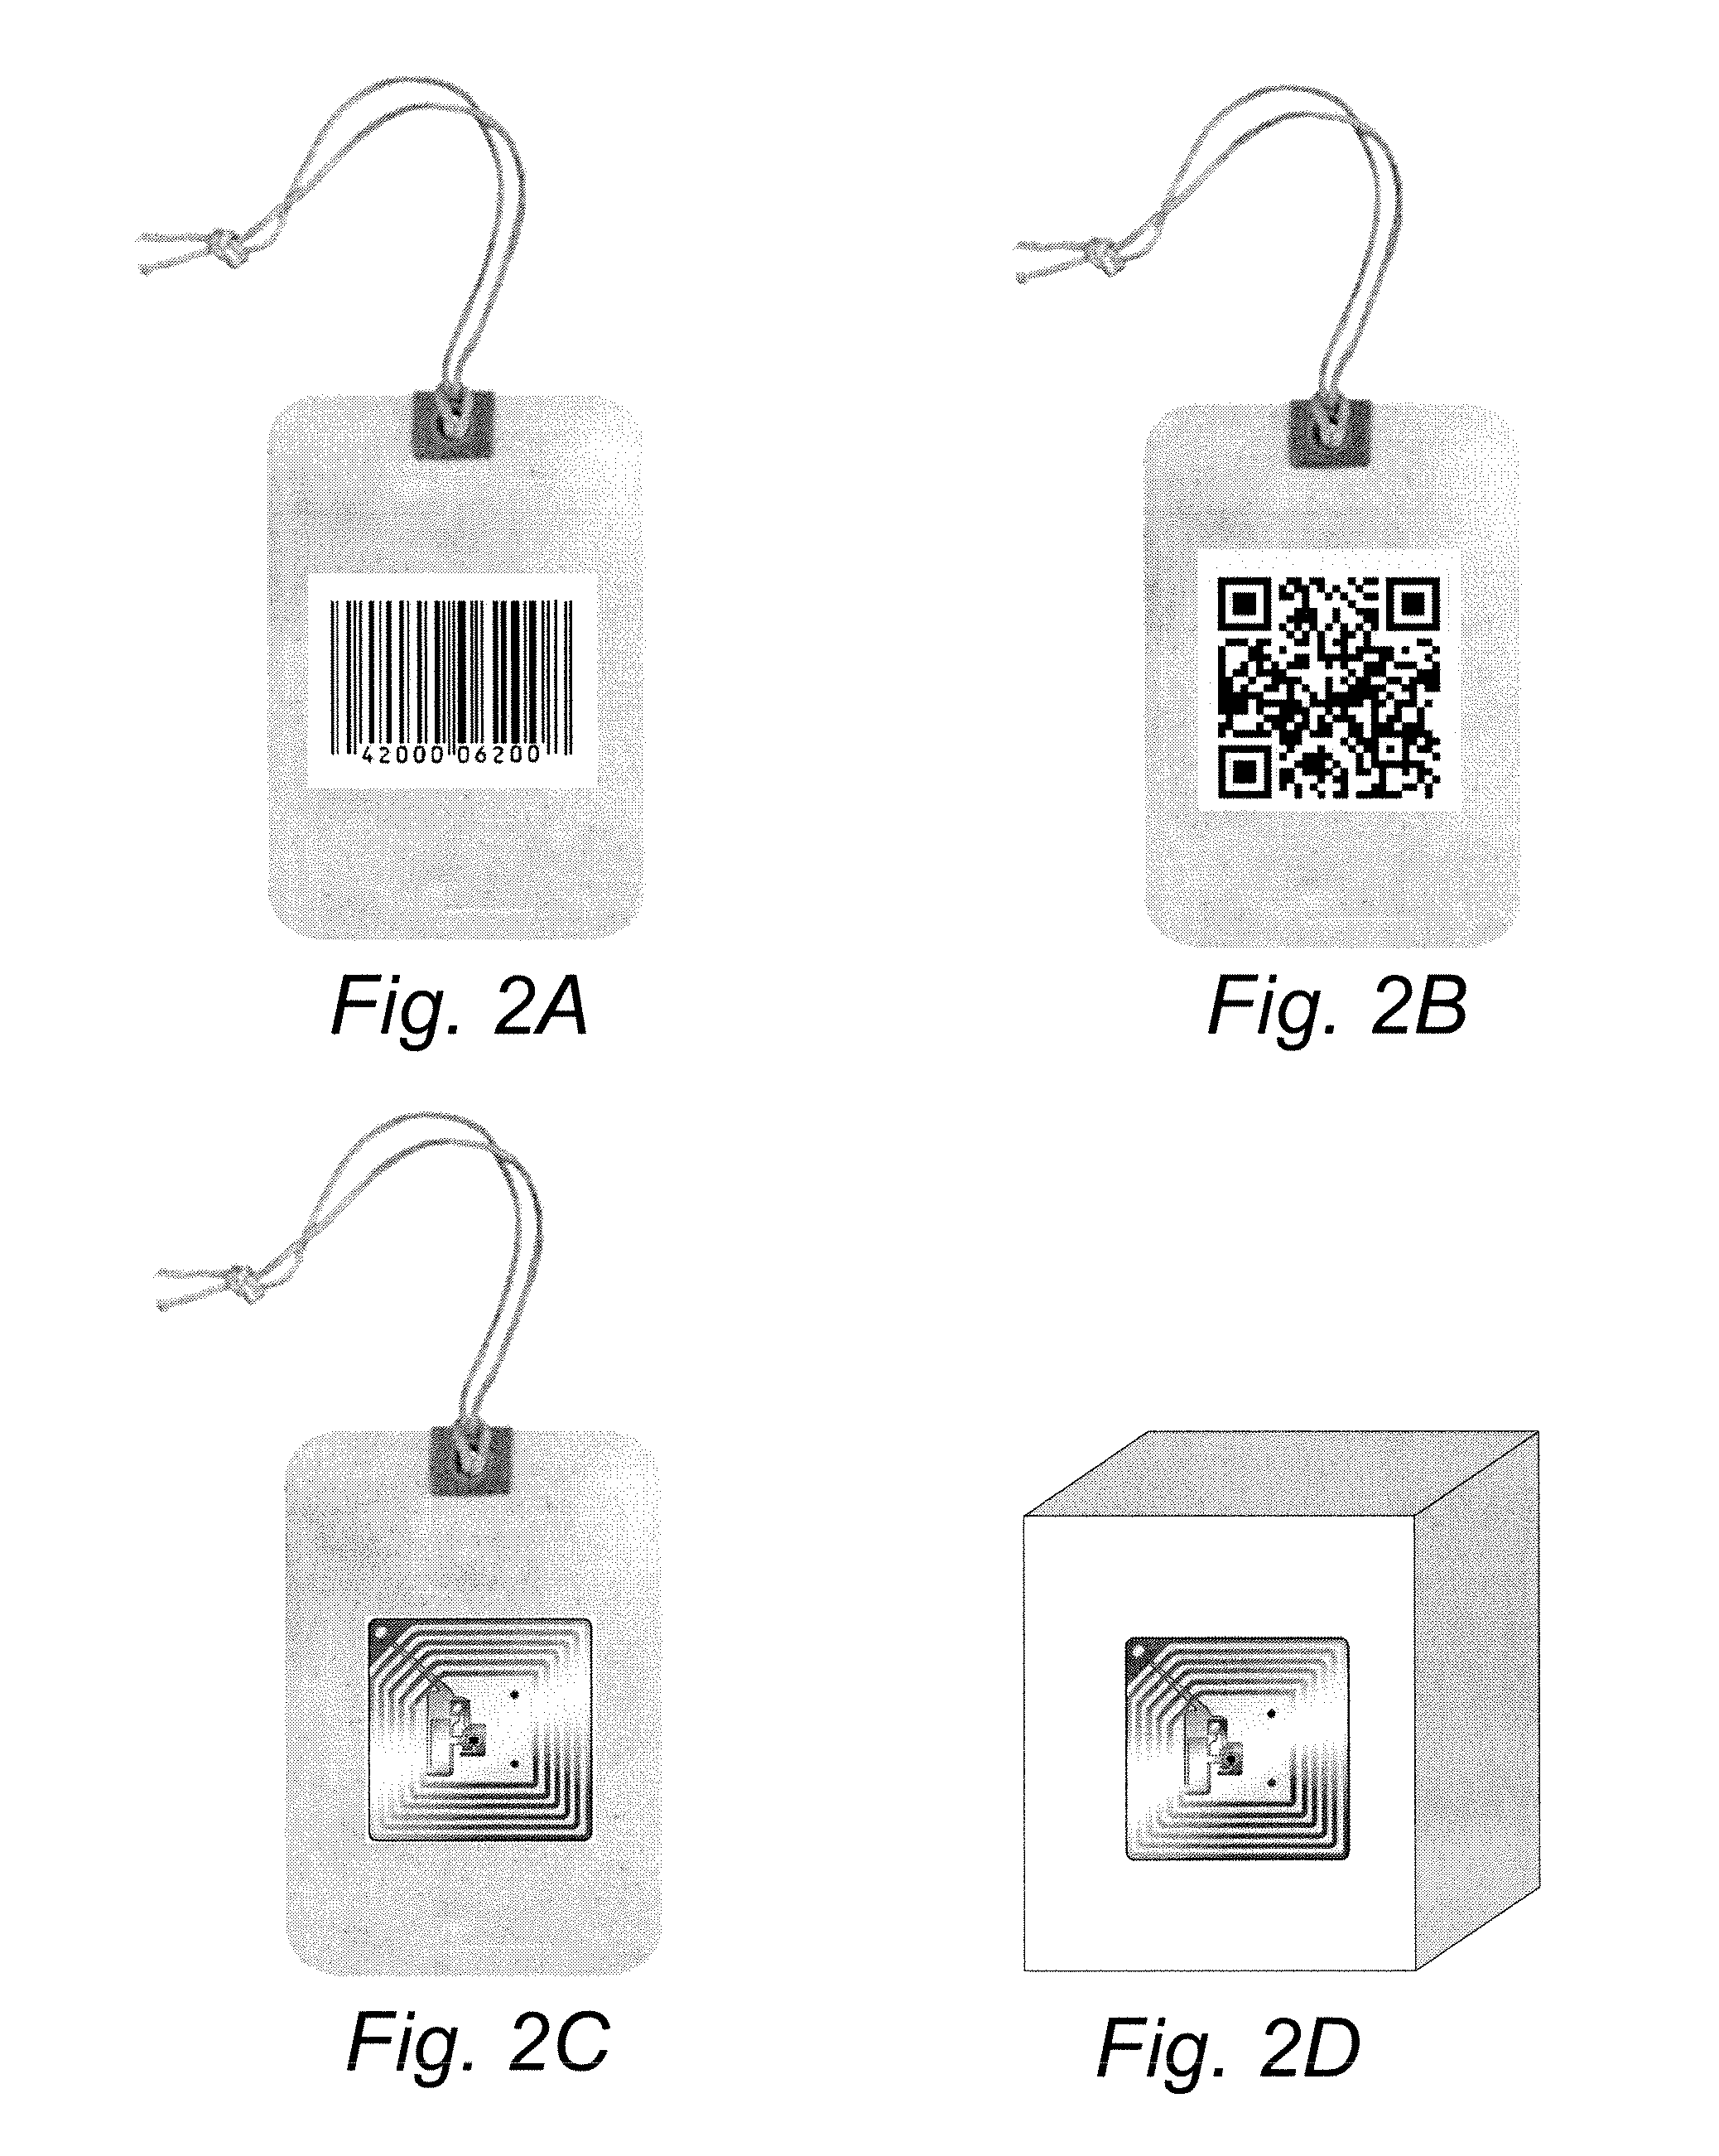 Airline baggage tracking and notification system